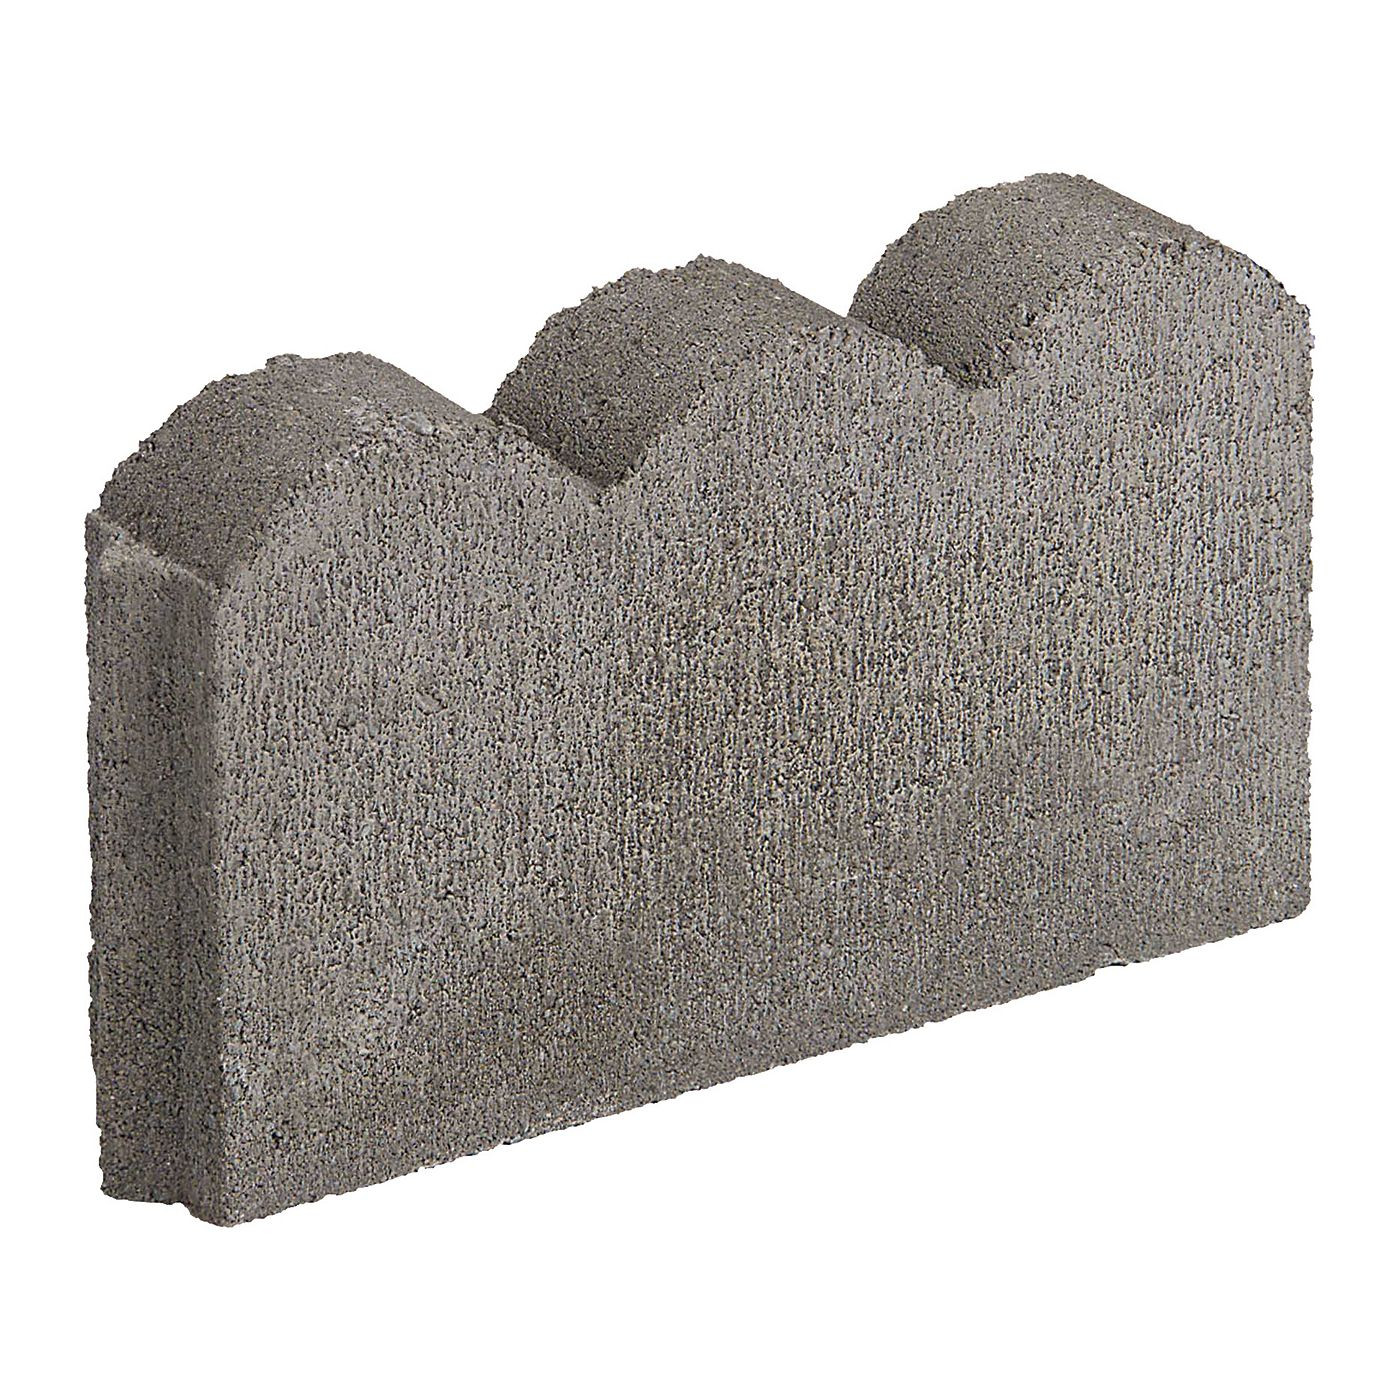 Lowes Landscape Edging Stone
 Shop Expocrete 8 in x 12 in Grey Scalloped Edging Stone at